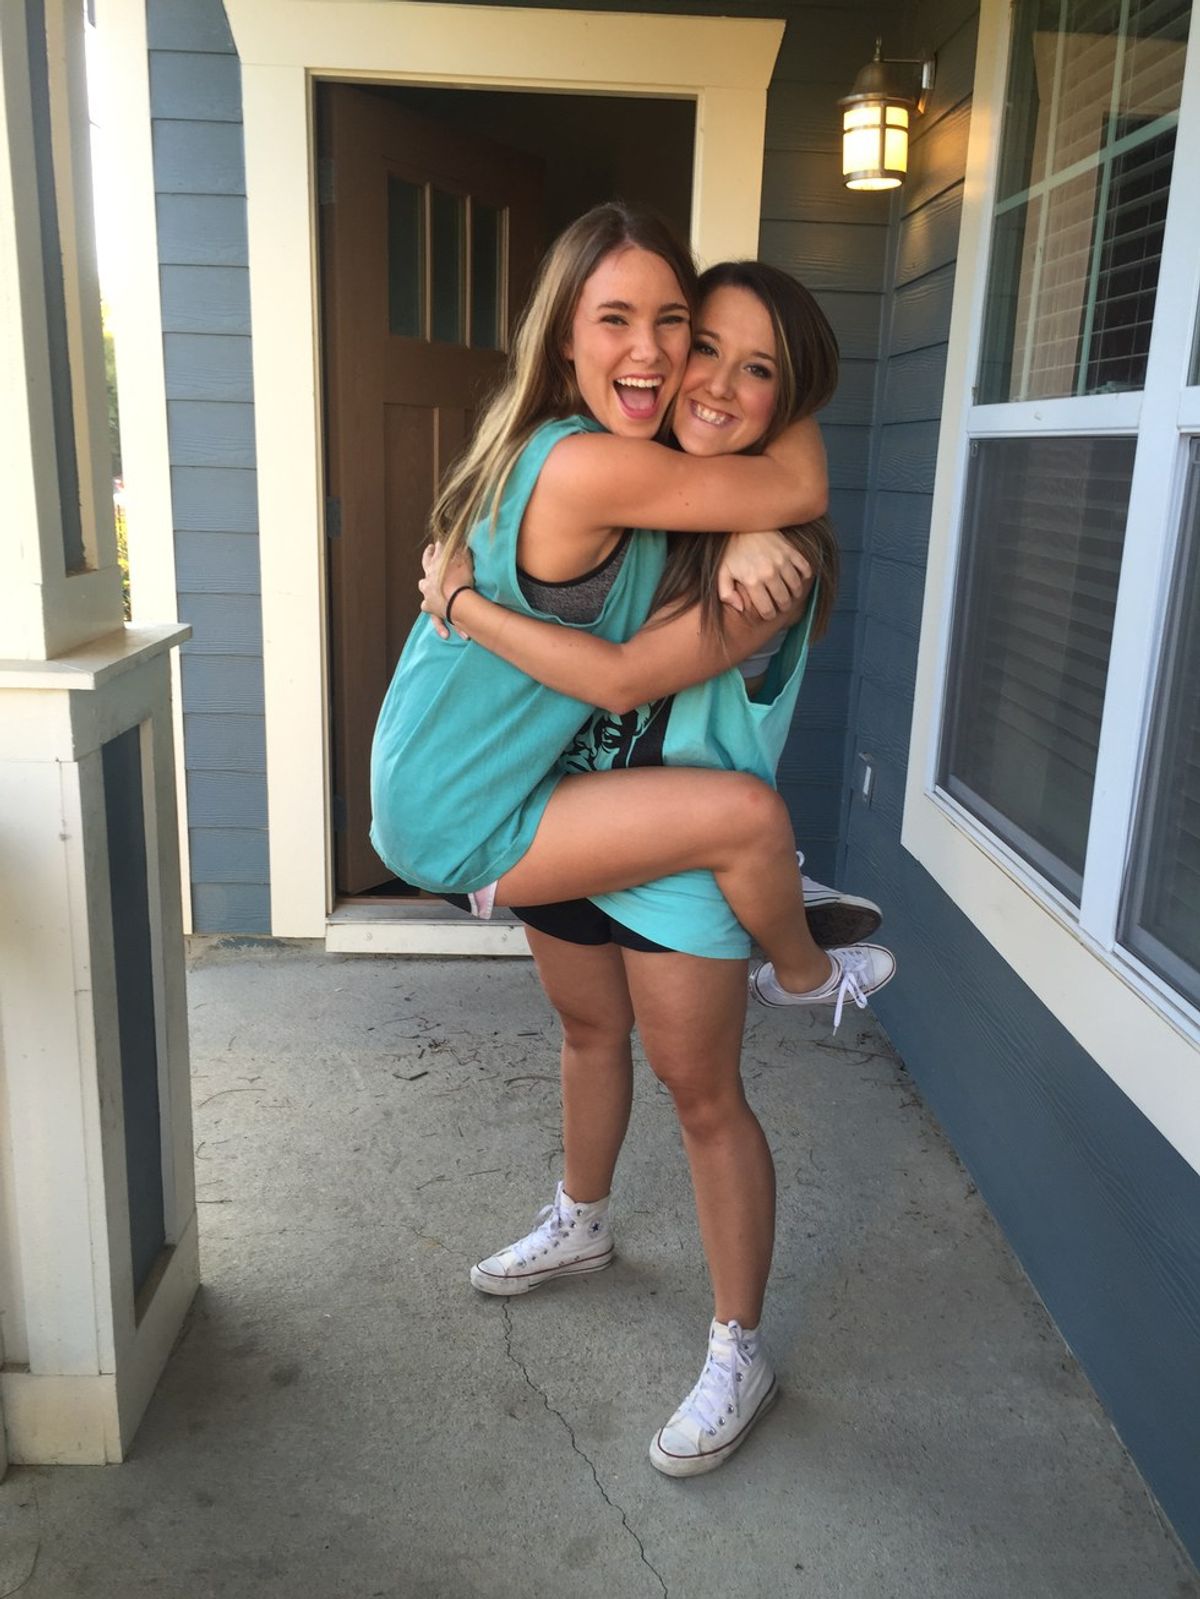 20 Thoughts A Big Has During Big/Little